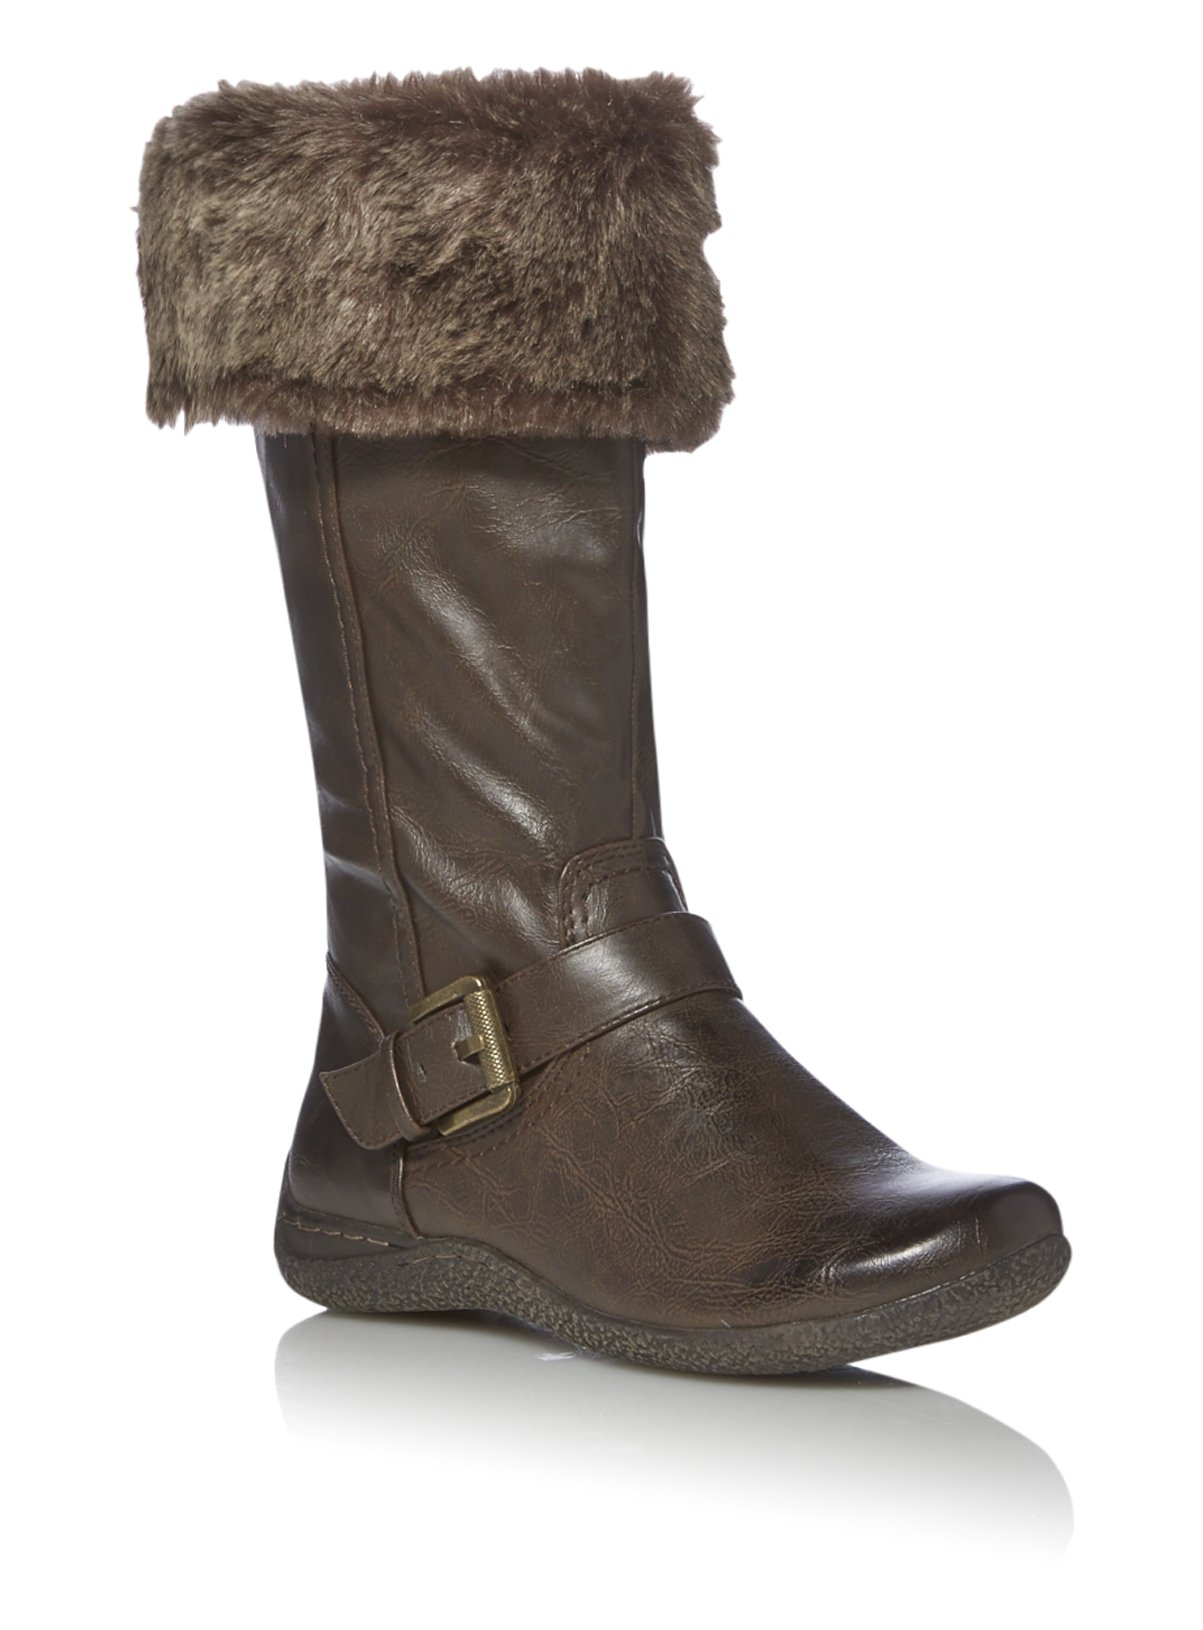 SALE Biomecanics 191205 Girls Leather Boots In Grey With Faux Fur Cuff